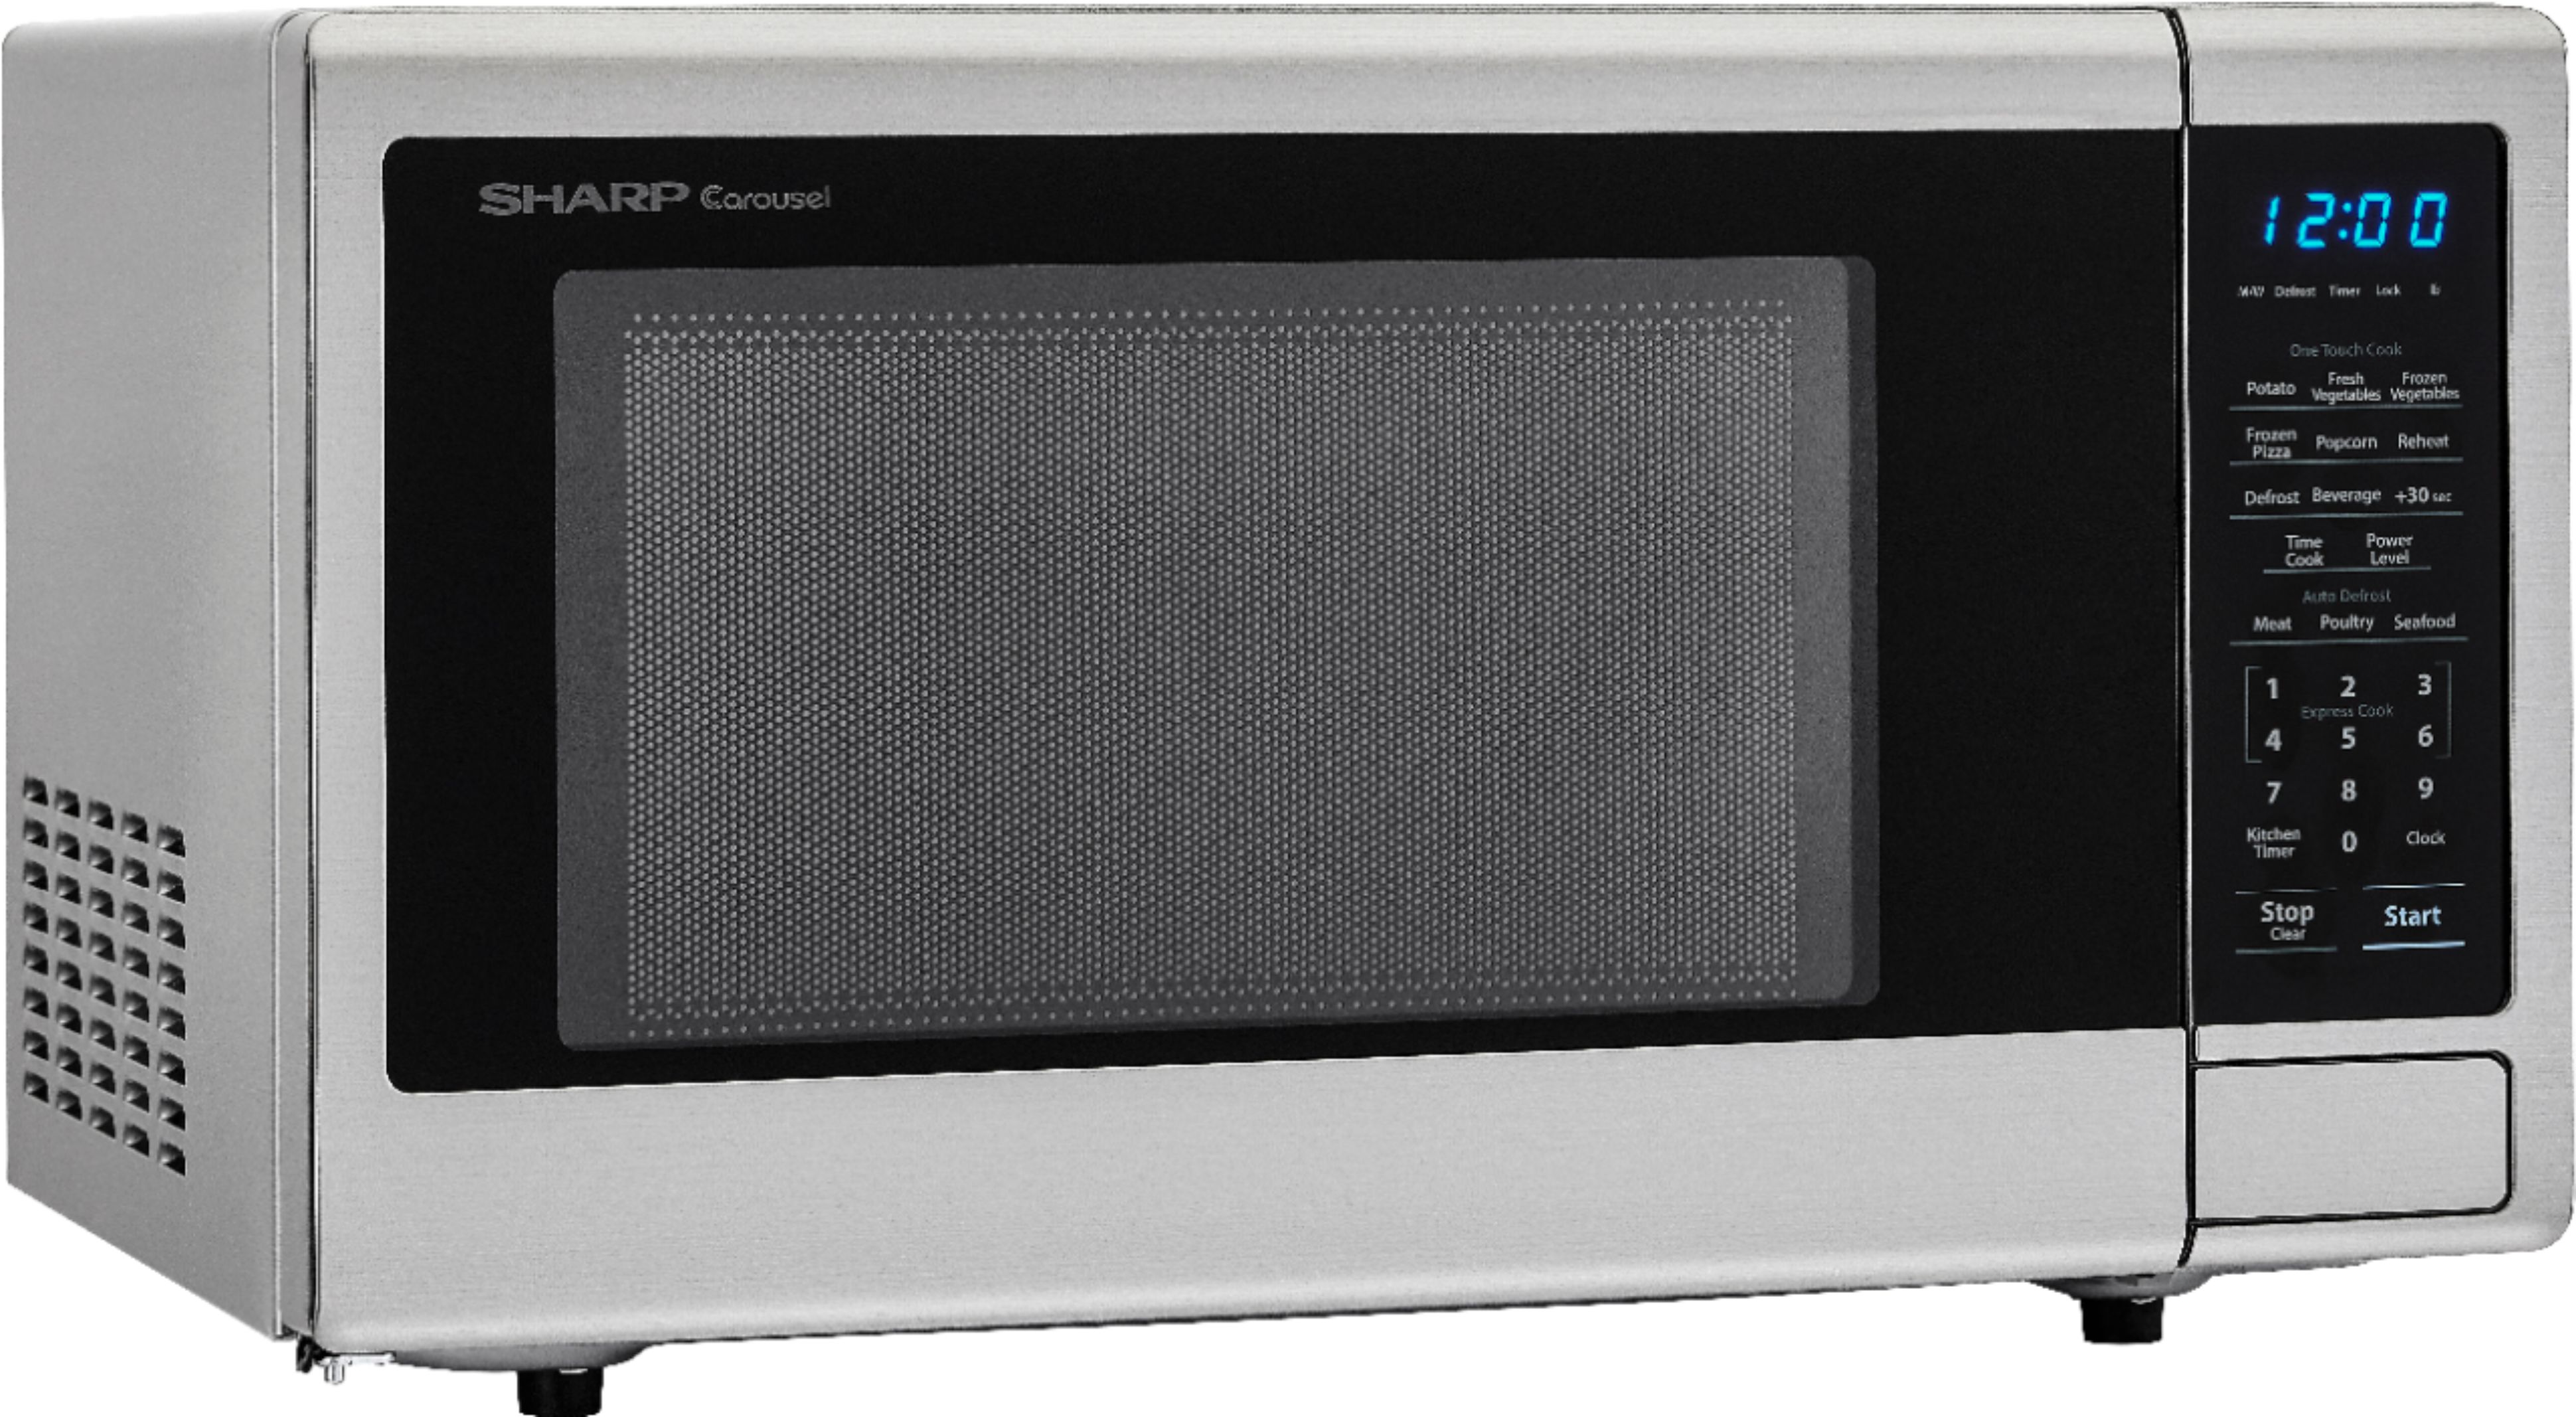 Angle View: Sharp - Carousel 1.5 Cu. Ft. Mid-Size Microwave - Black